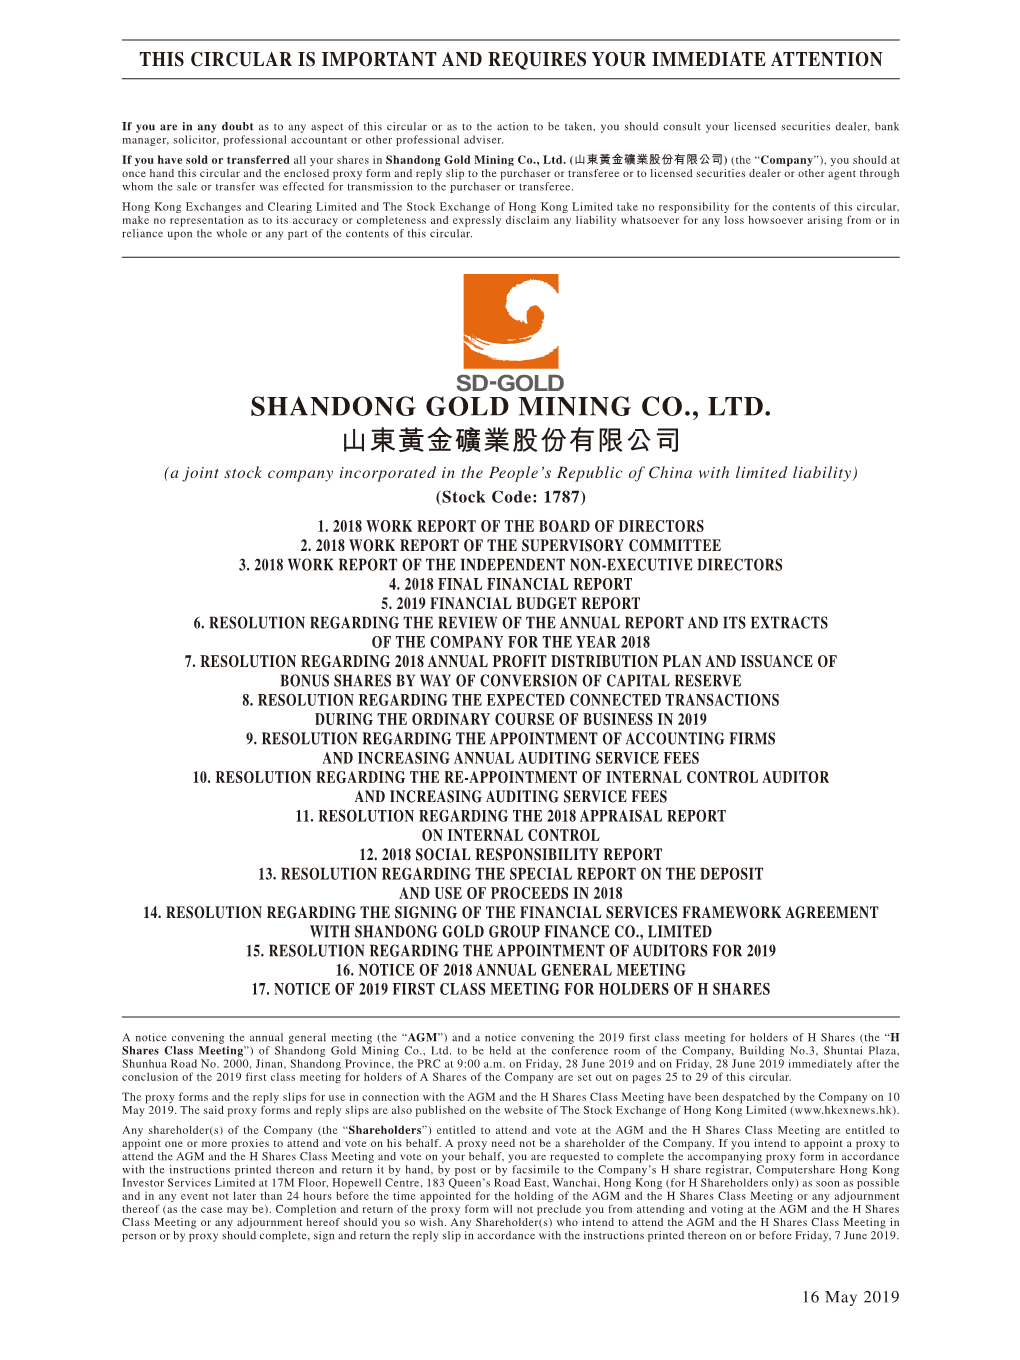 SHANDONG GOLD MINING CO., LTD. 山東黃金礦業股份有限公司 (A Joint Stock Company Incorporated in the People’S Republic of China with Limited Liability) (Stock Code: 1787) 1